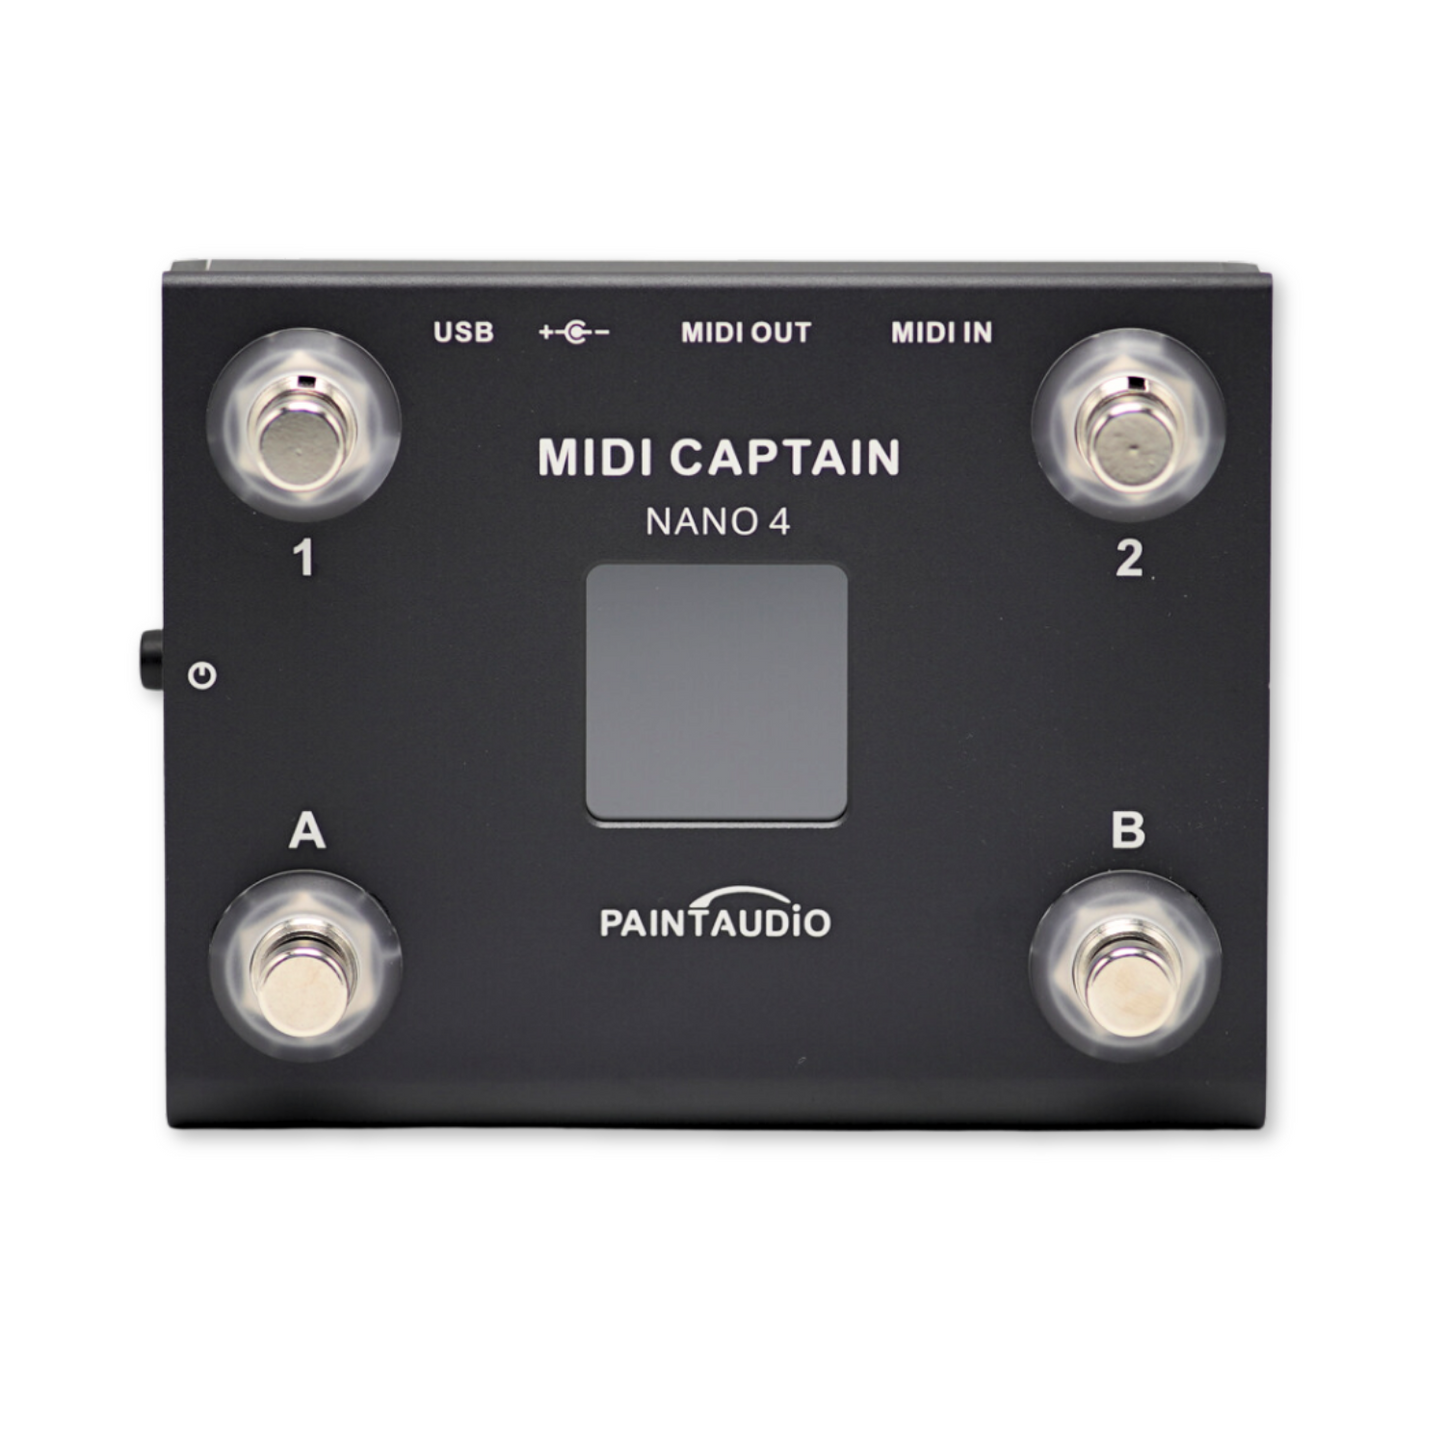 MIDI Captain NANO 4 Controller with HID Multi-state Cycling